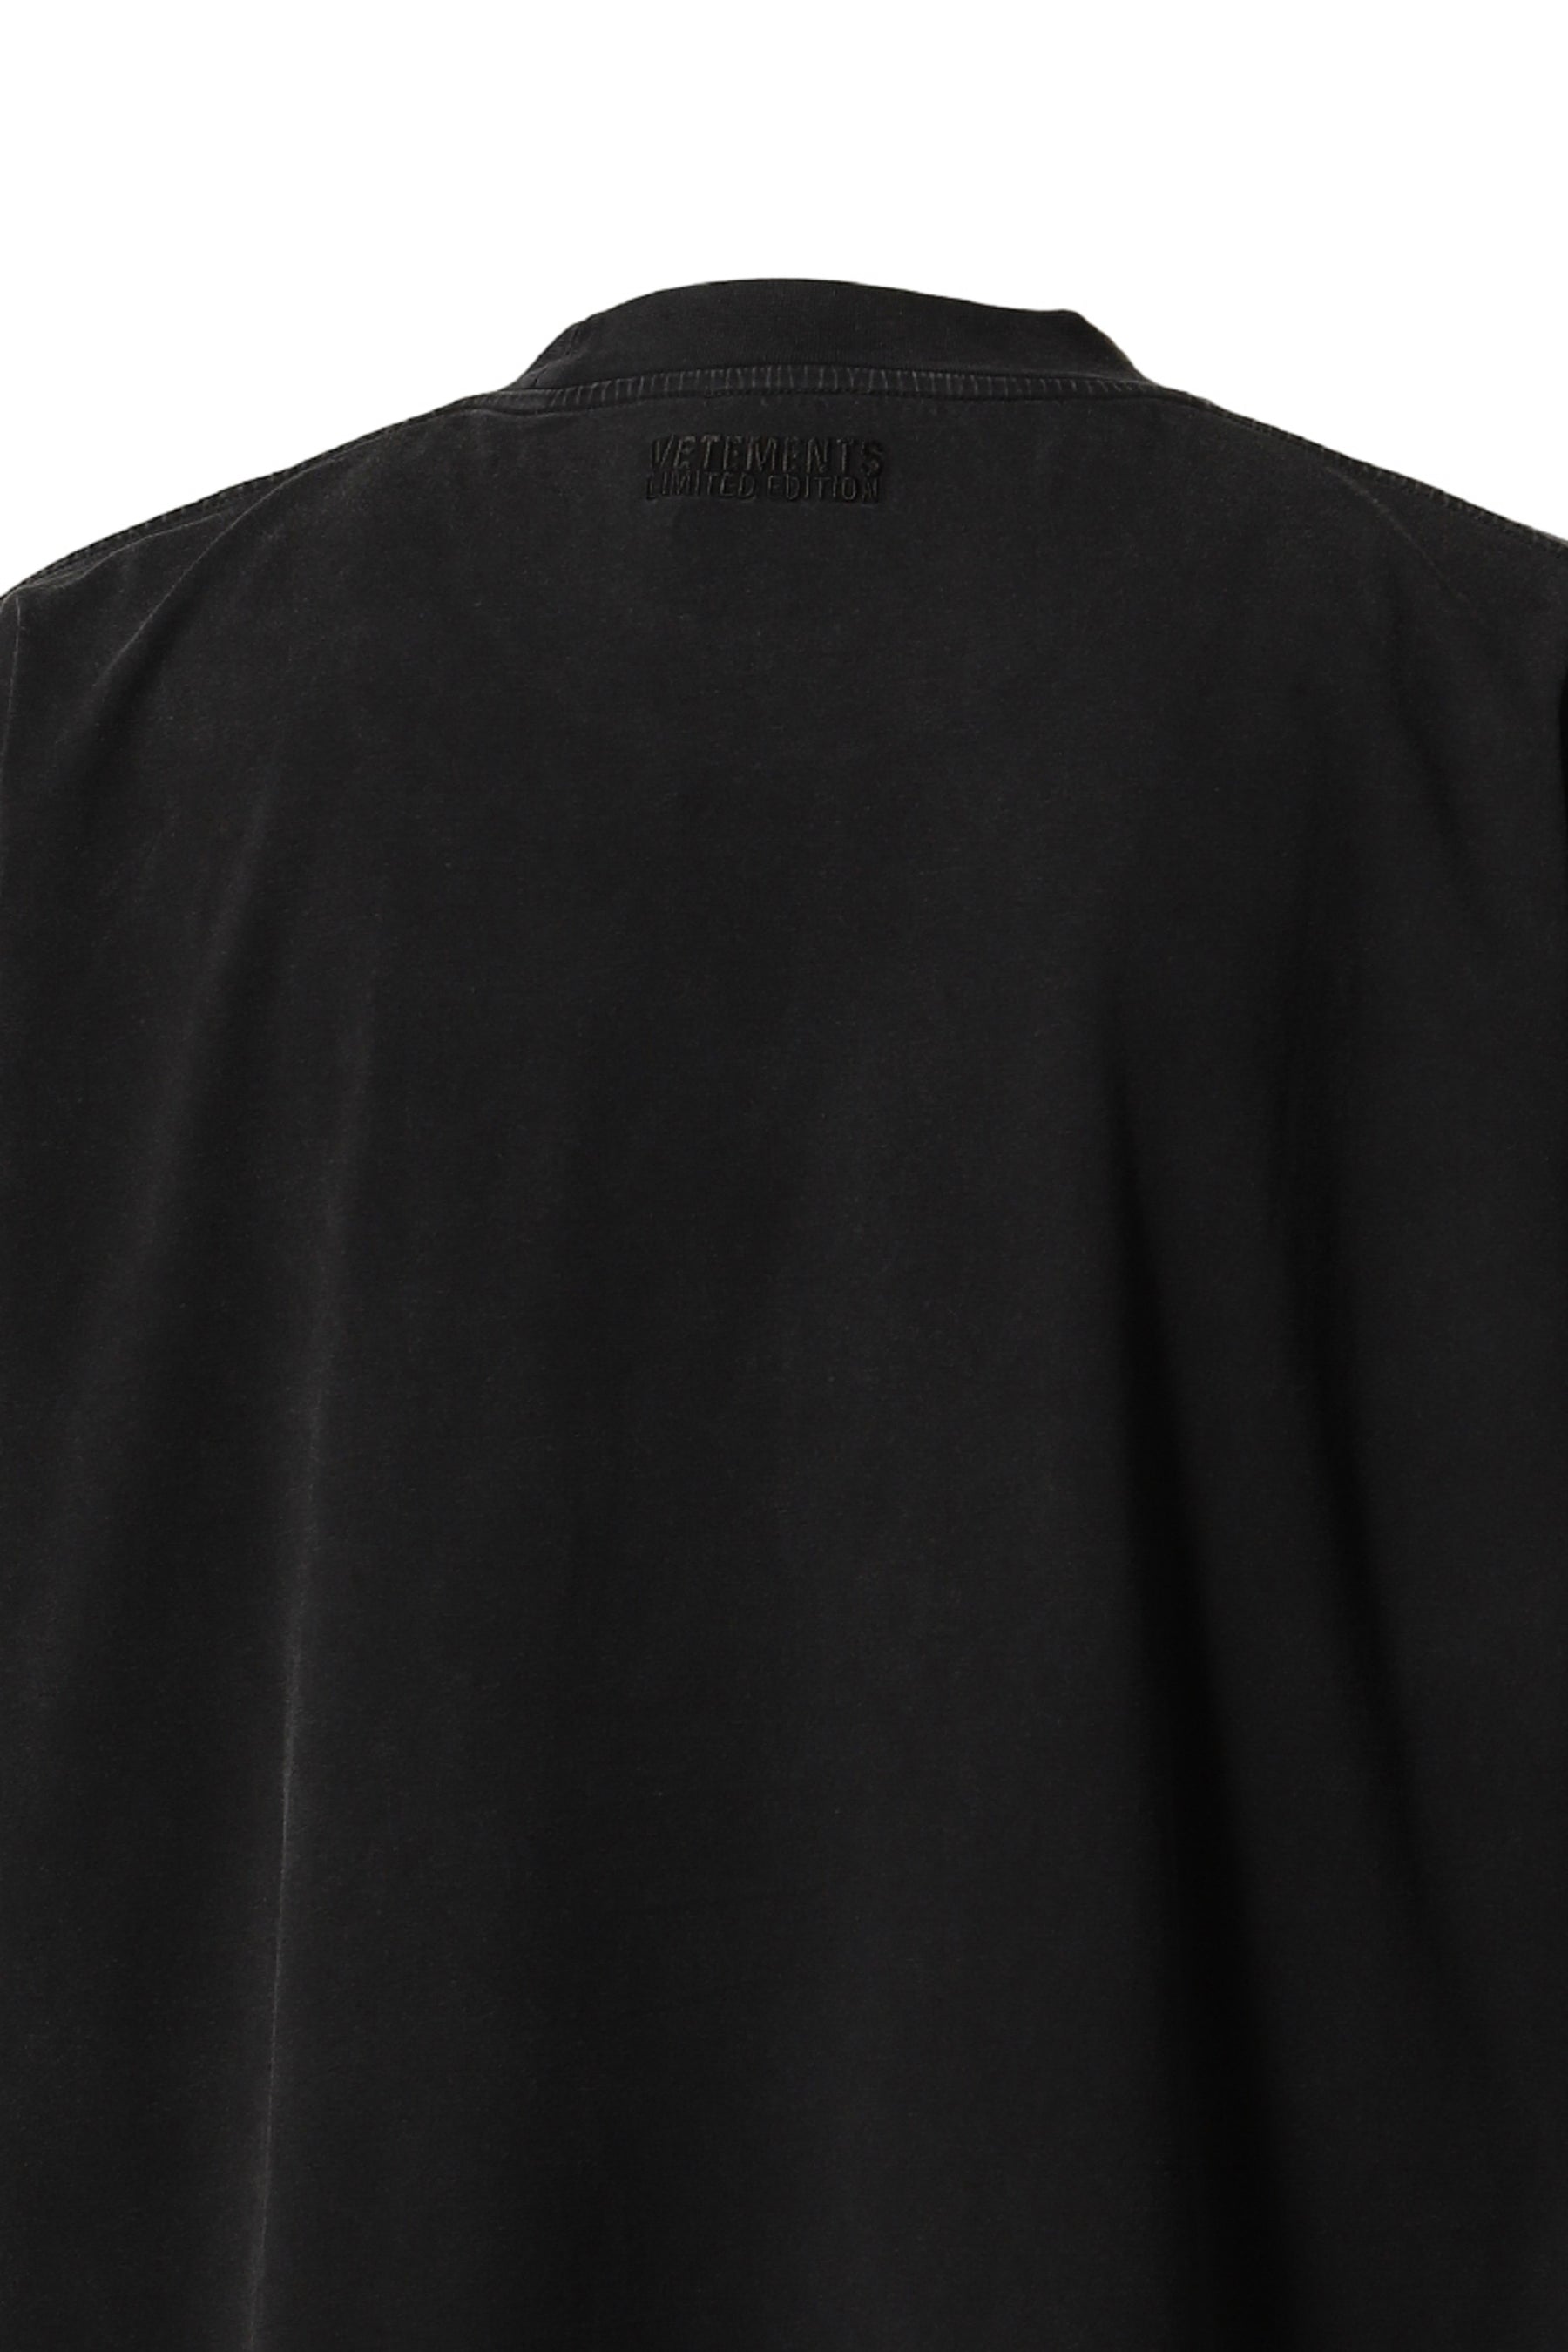 VERY EXPENSIVE T-SHIRT / WASHED BLK